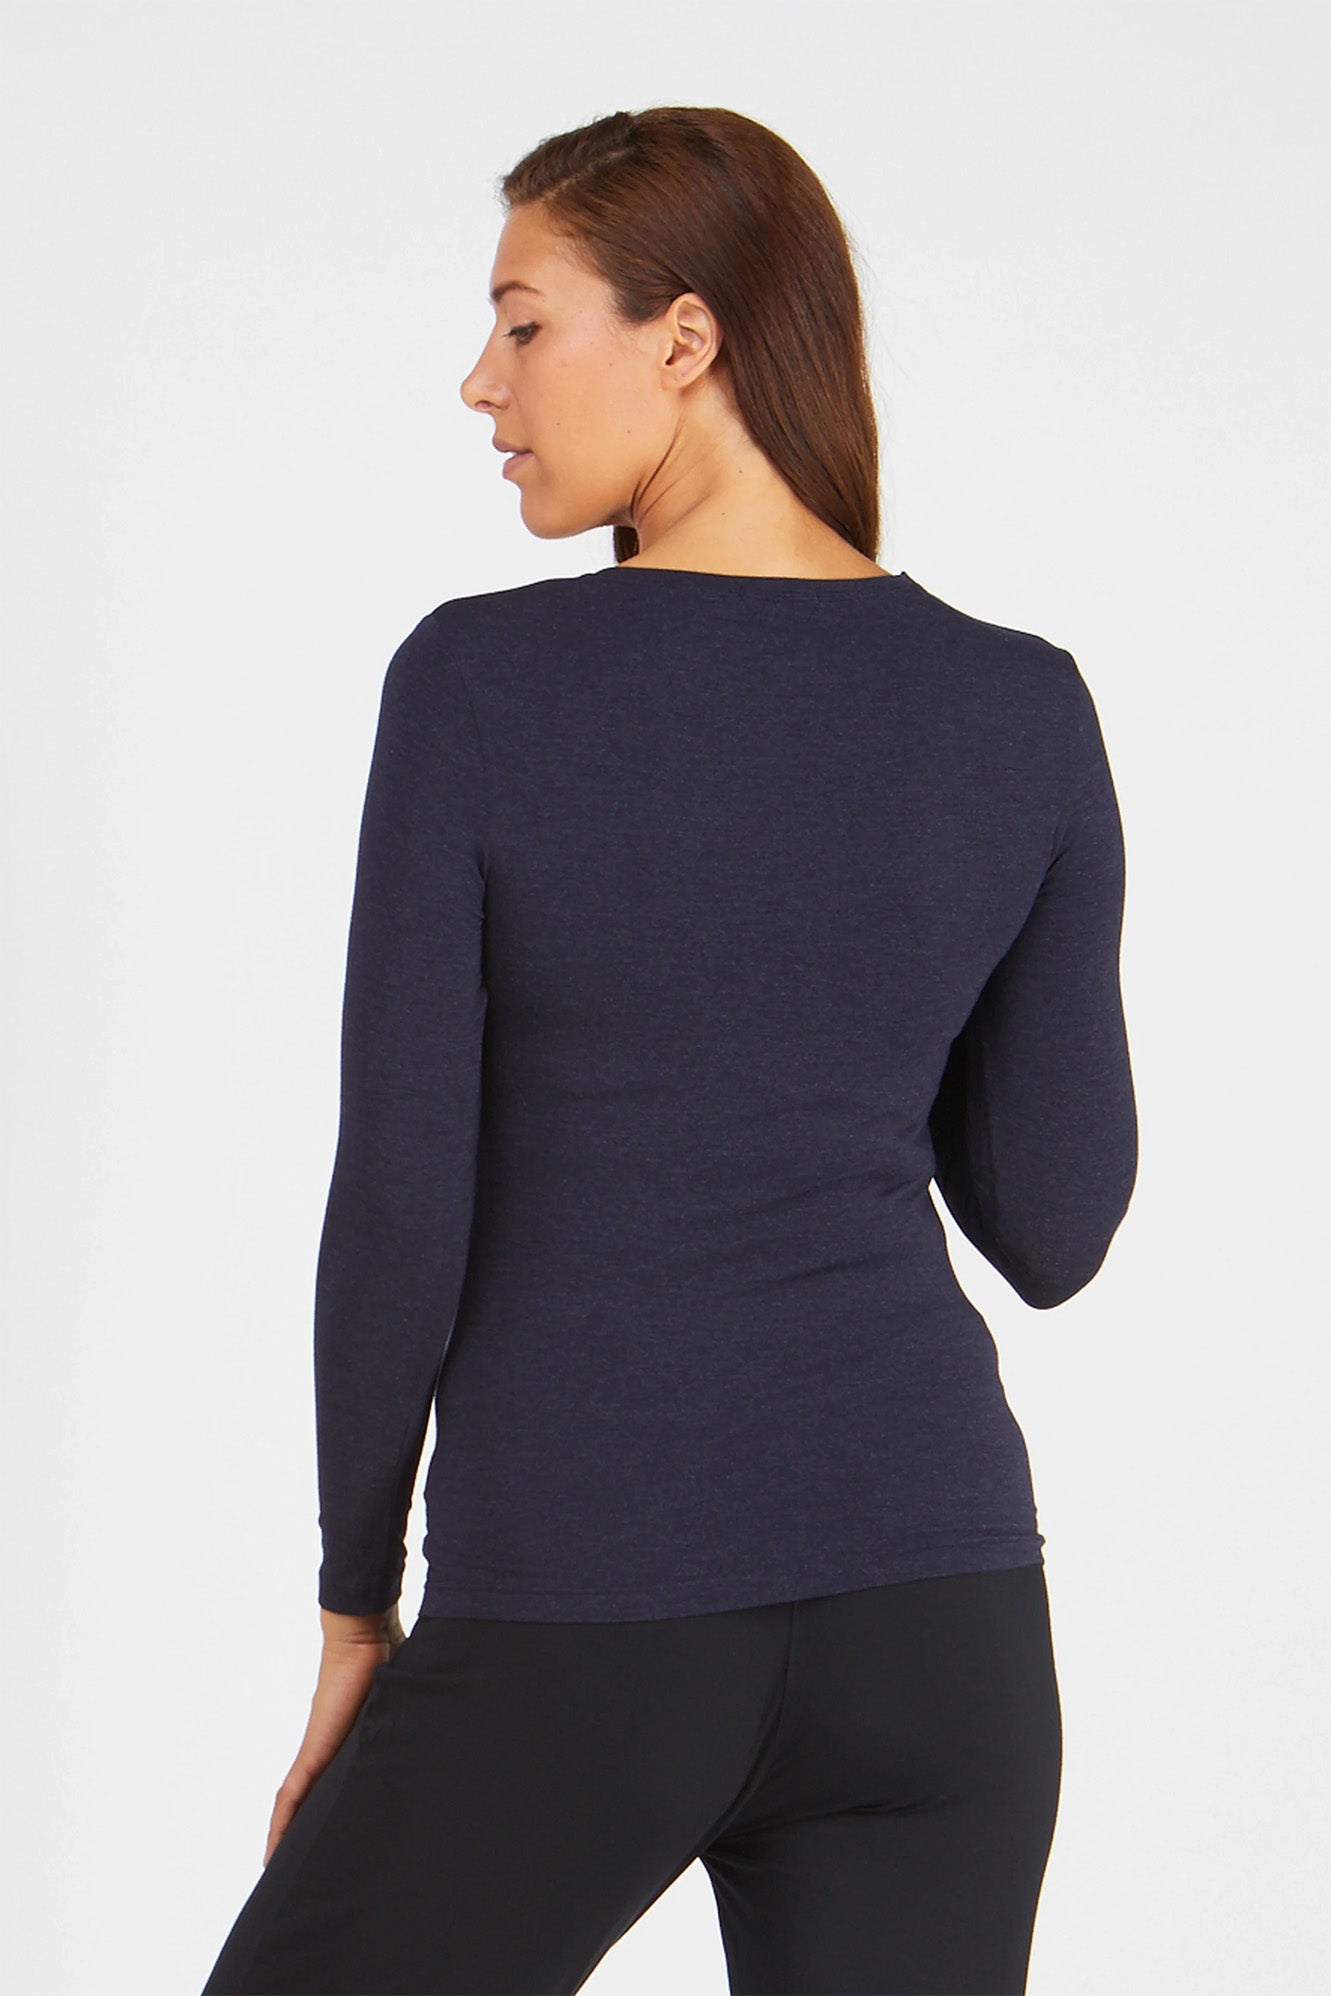 Woman wearing Tani 79276 High Neck Long Sleeve in midnight back view